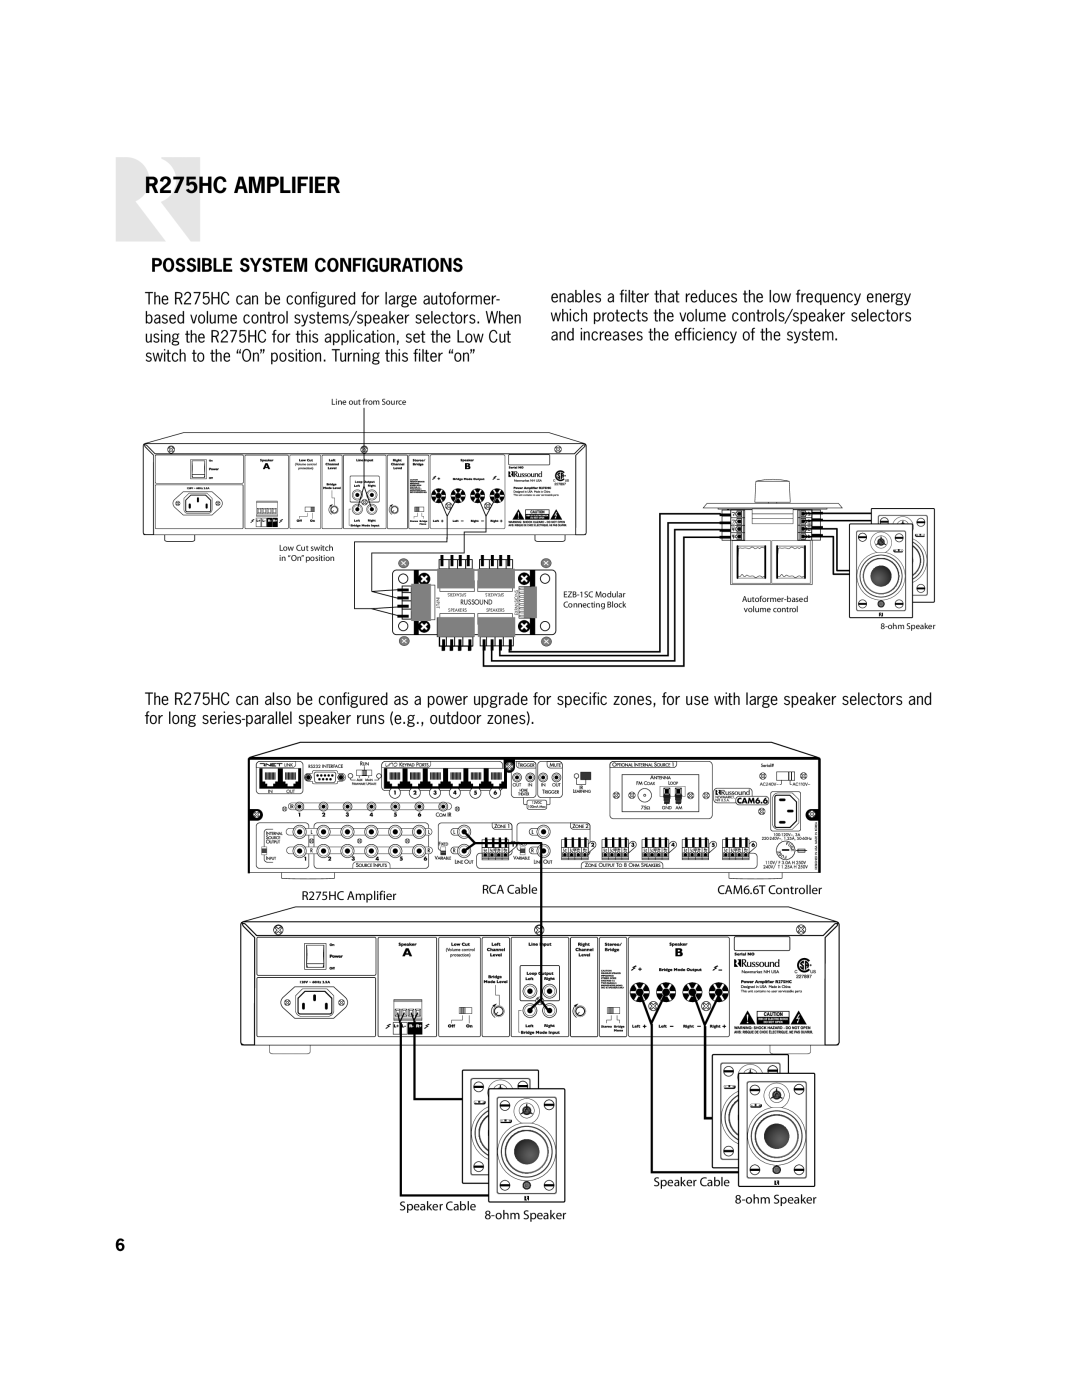 Russound Possible System Configurations, R275HC AMPLIFIER, R275HC Amplifier, RCA Cable, CAM6.6T Controller, ohmSpeaker 